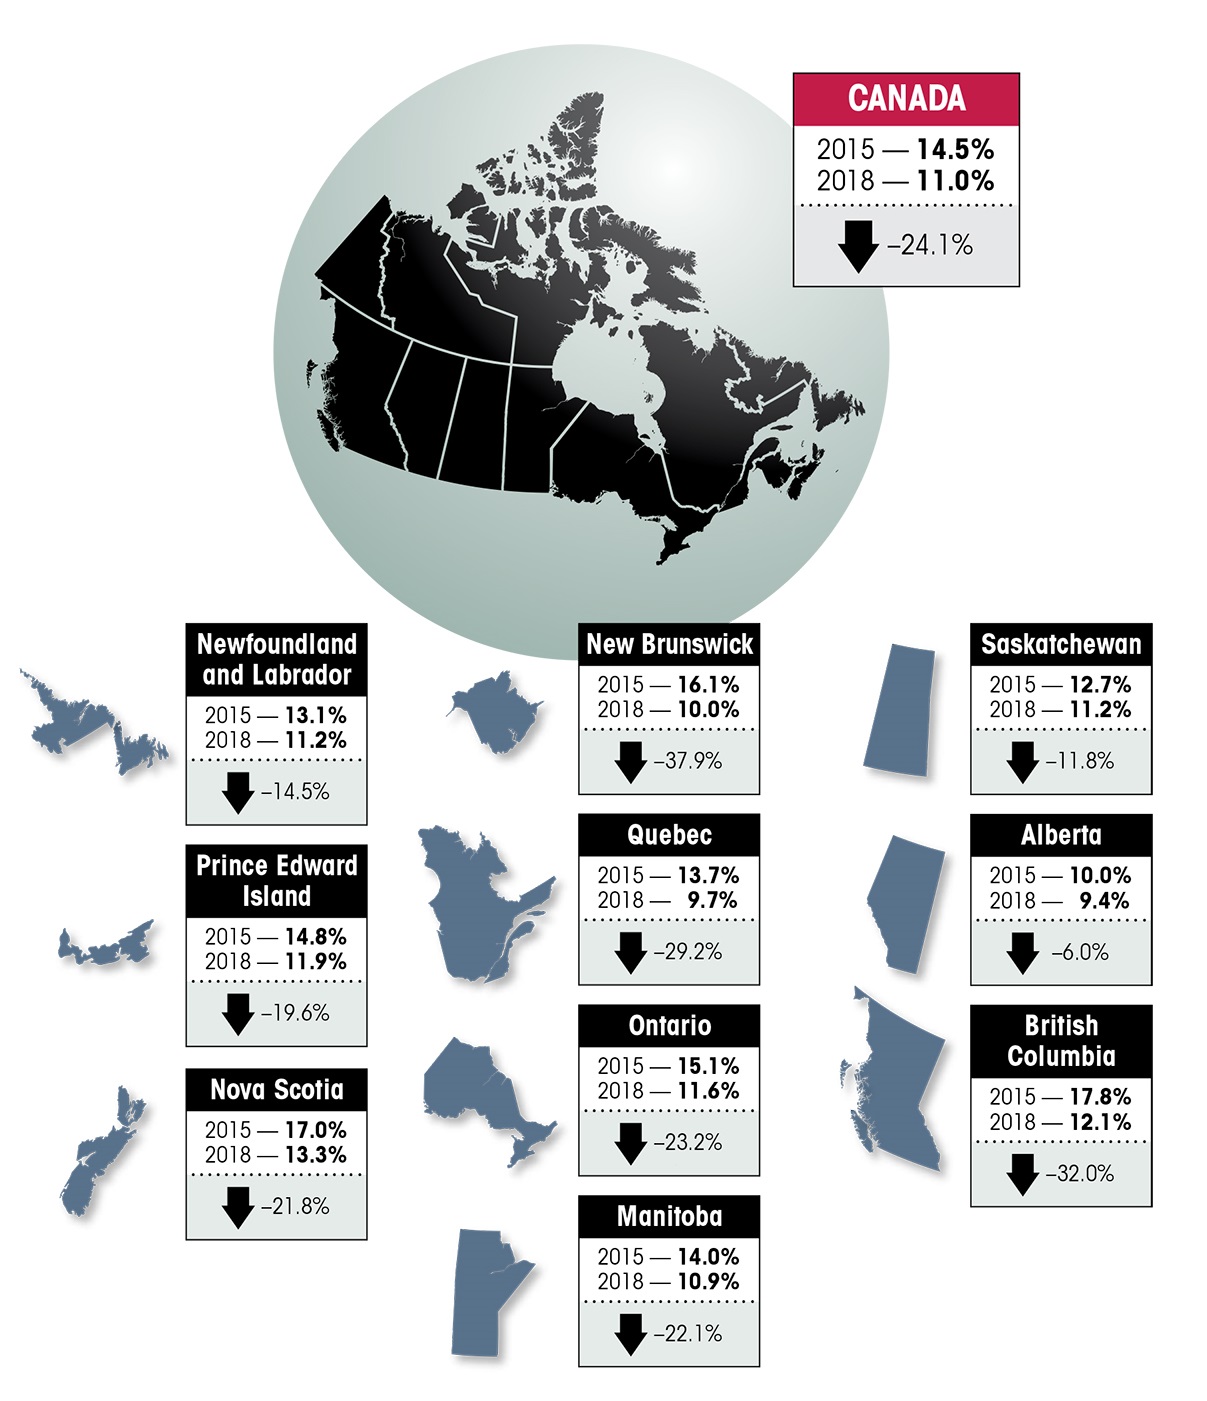 Infographic of the poverty rates per province and territories in 2015 and 2018: description follows